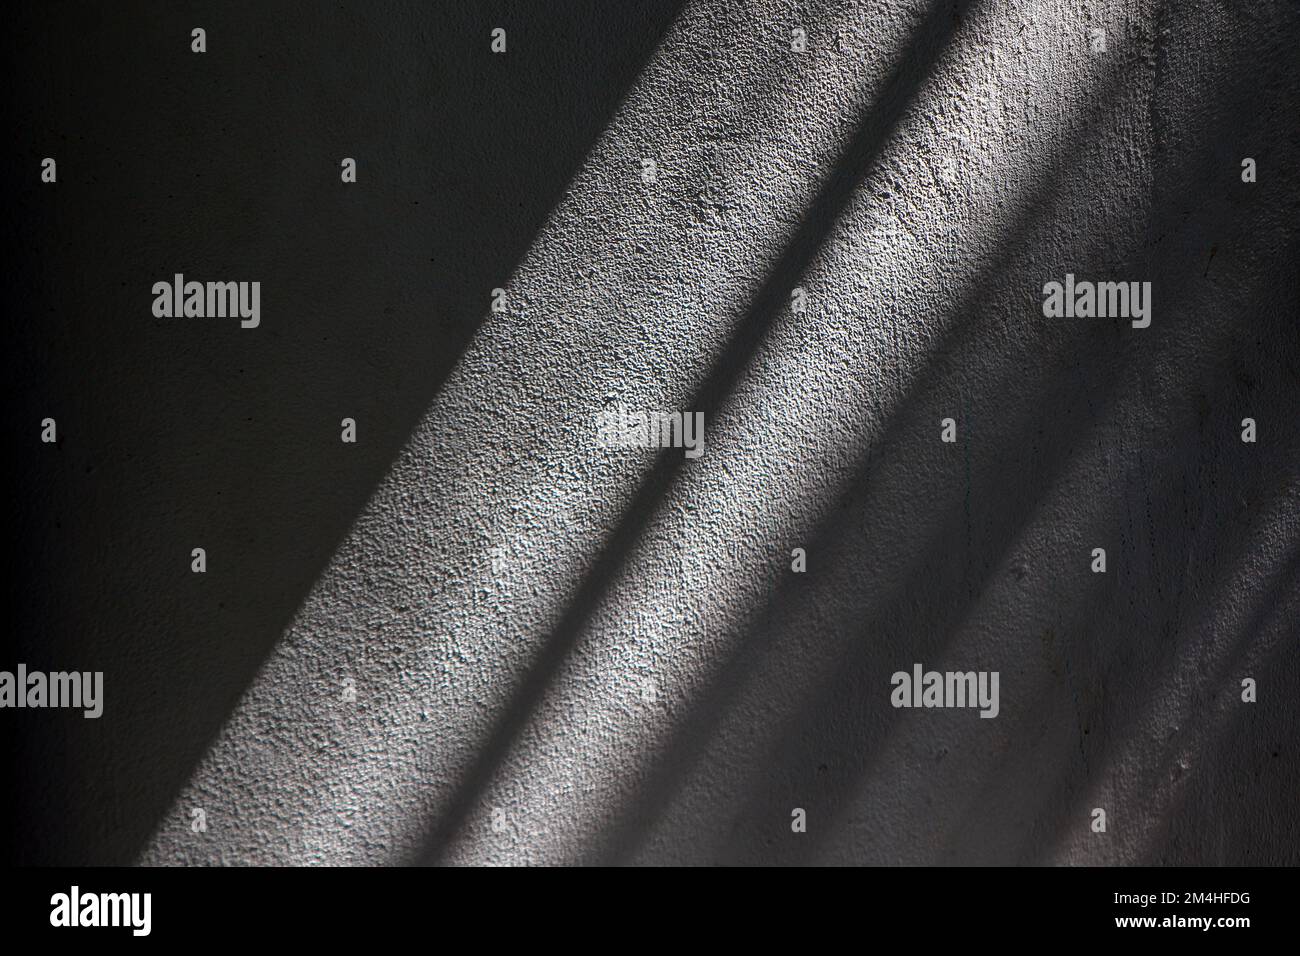 light and shadow on the rough walls of the house Focus on slightly blurry images. Stock Photo